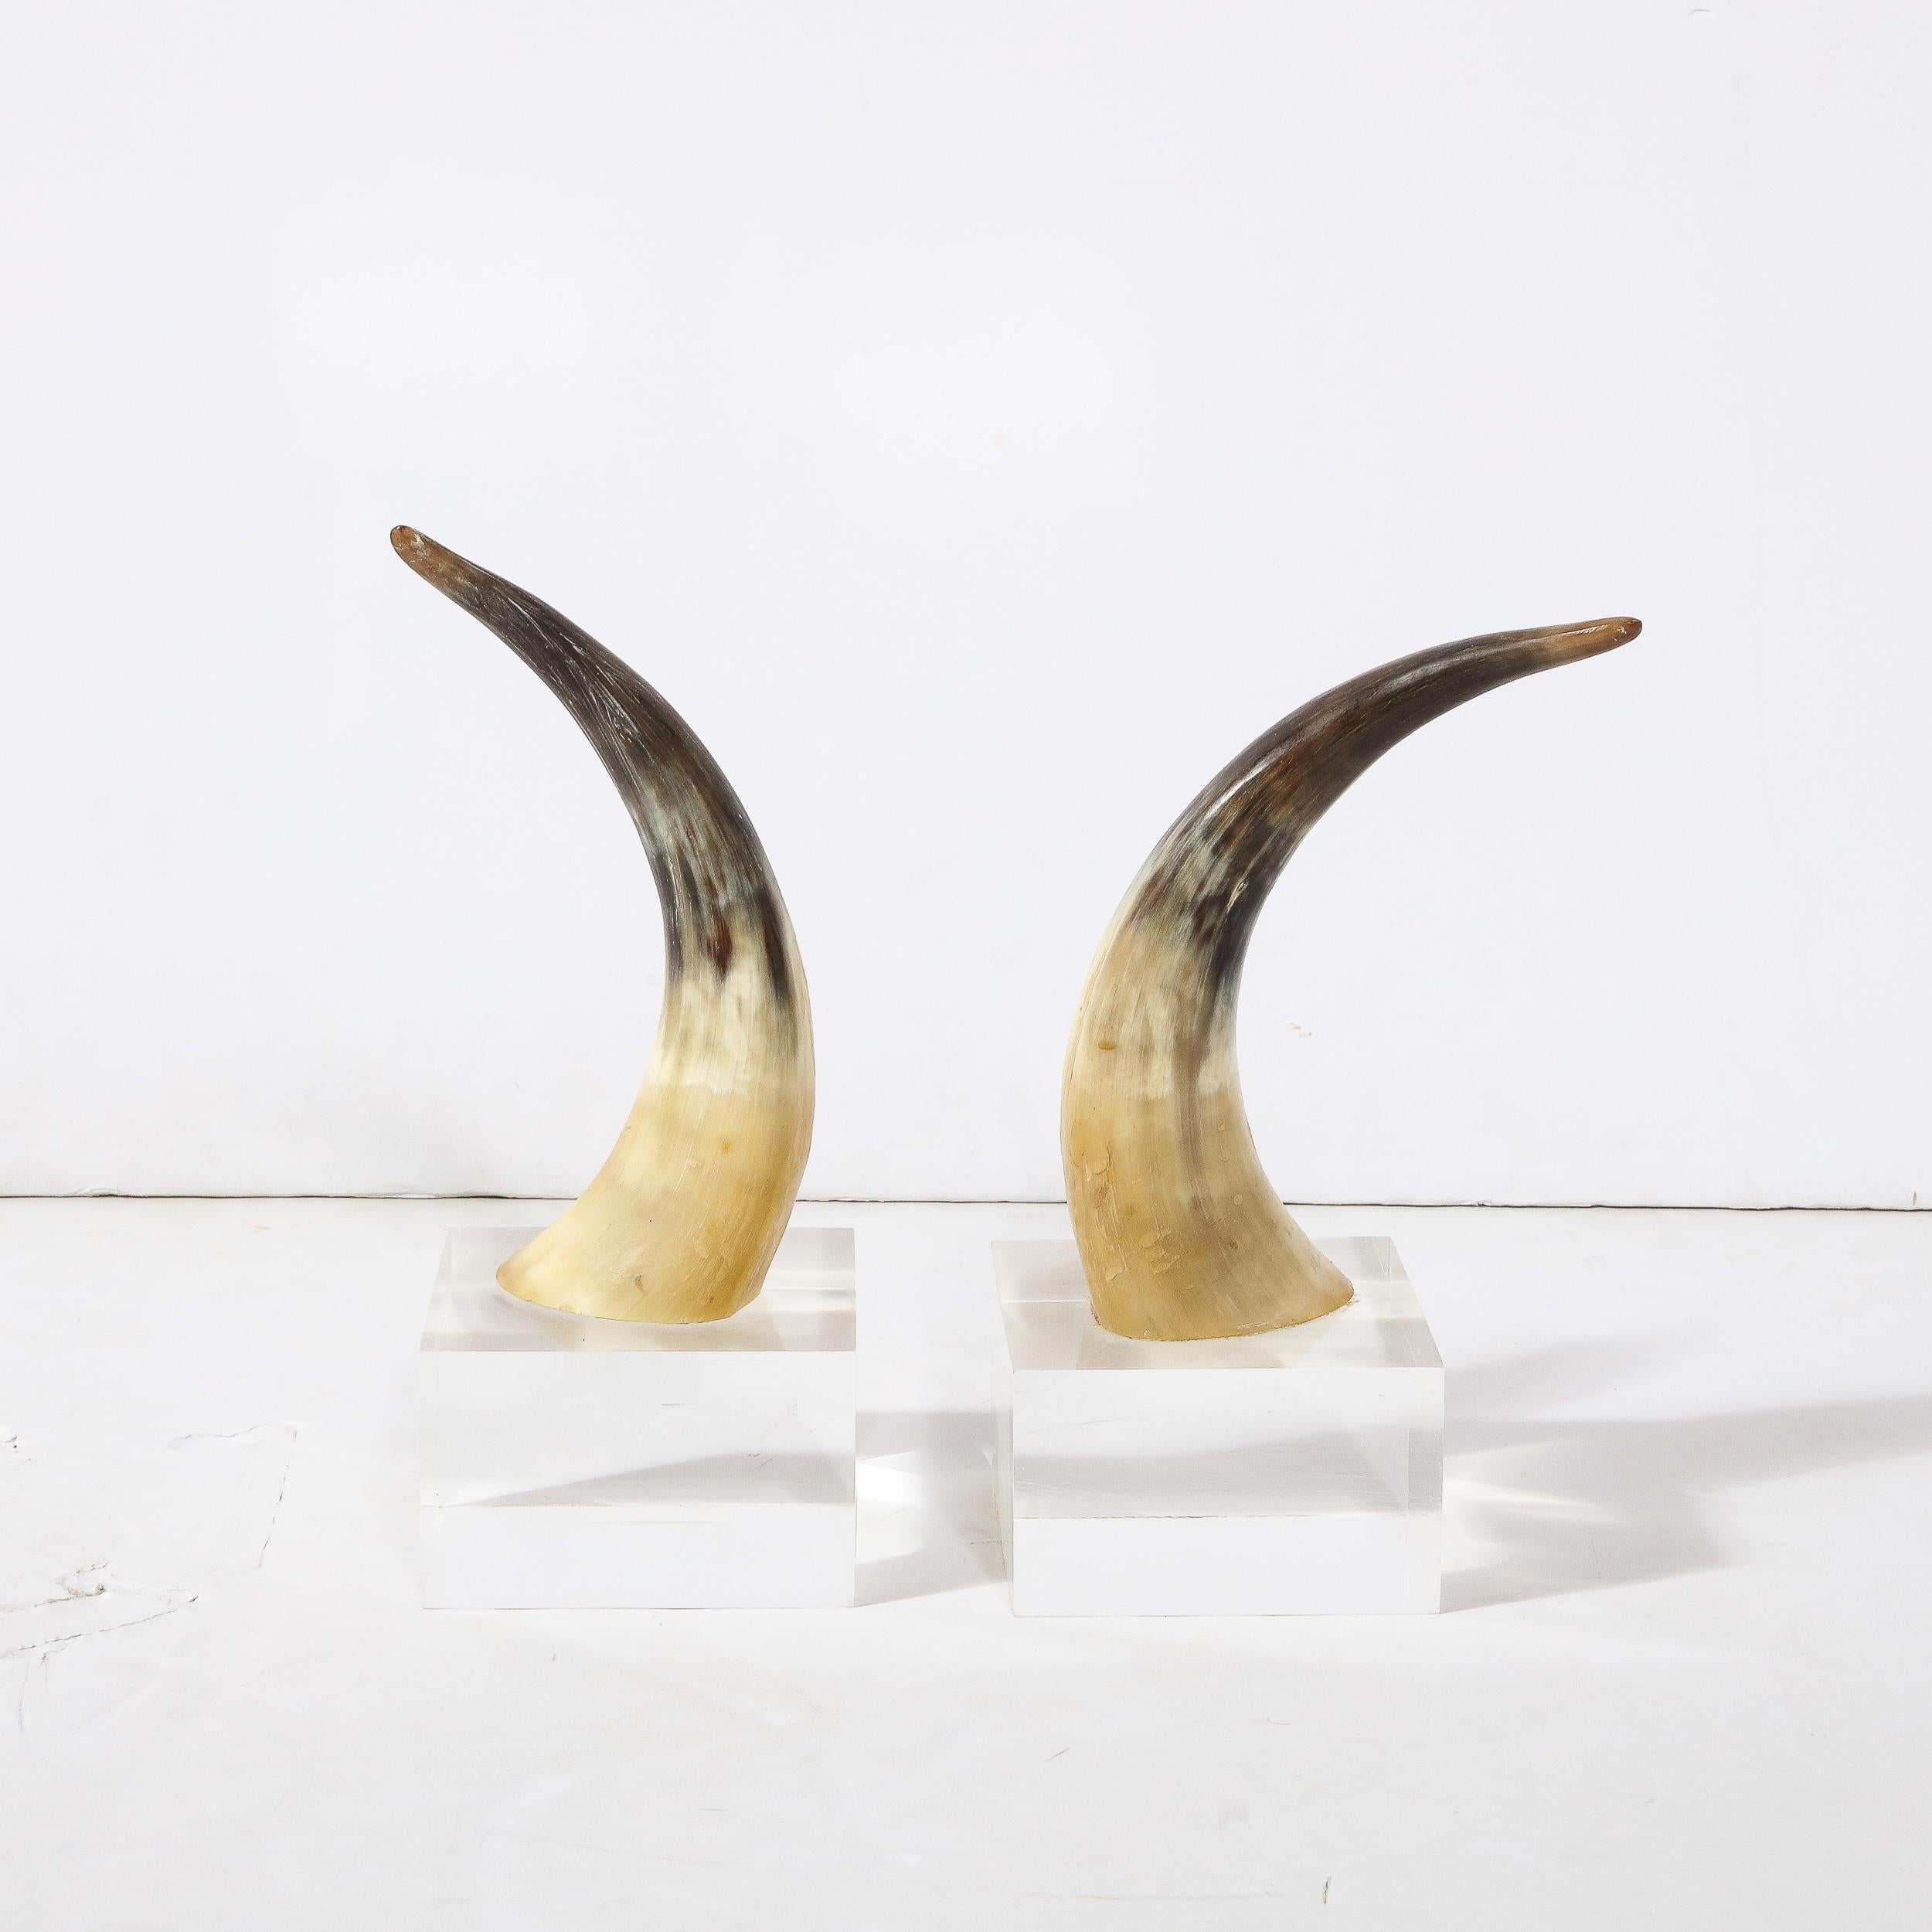 This stunning pair of modernist bull horn book ends were realized in the United States during the latter half of the 20th century. They offer the curved bull horns with their innately dynamic form and gradient color palate transitioning from a dark